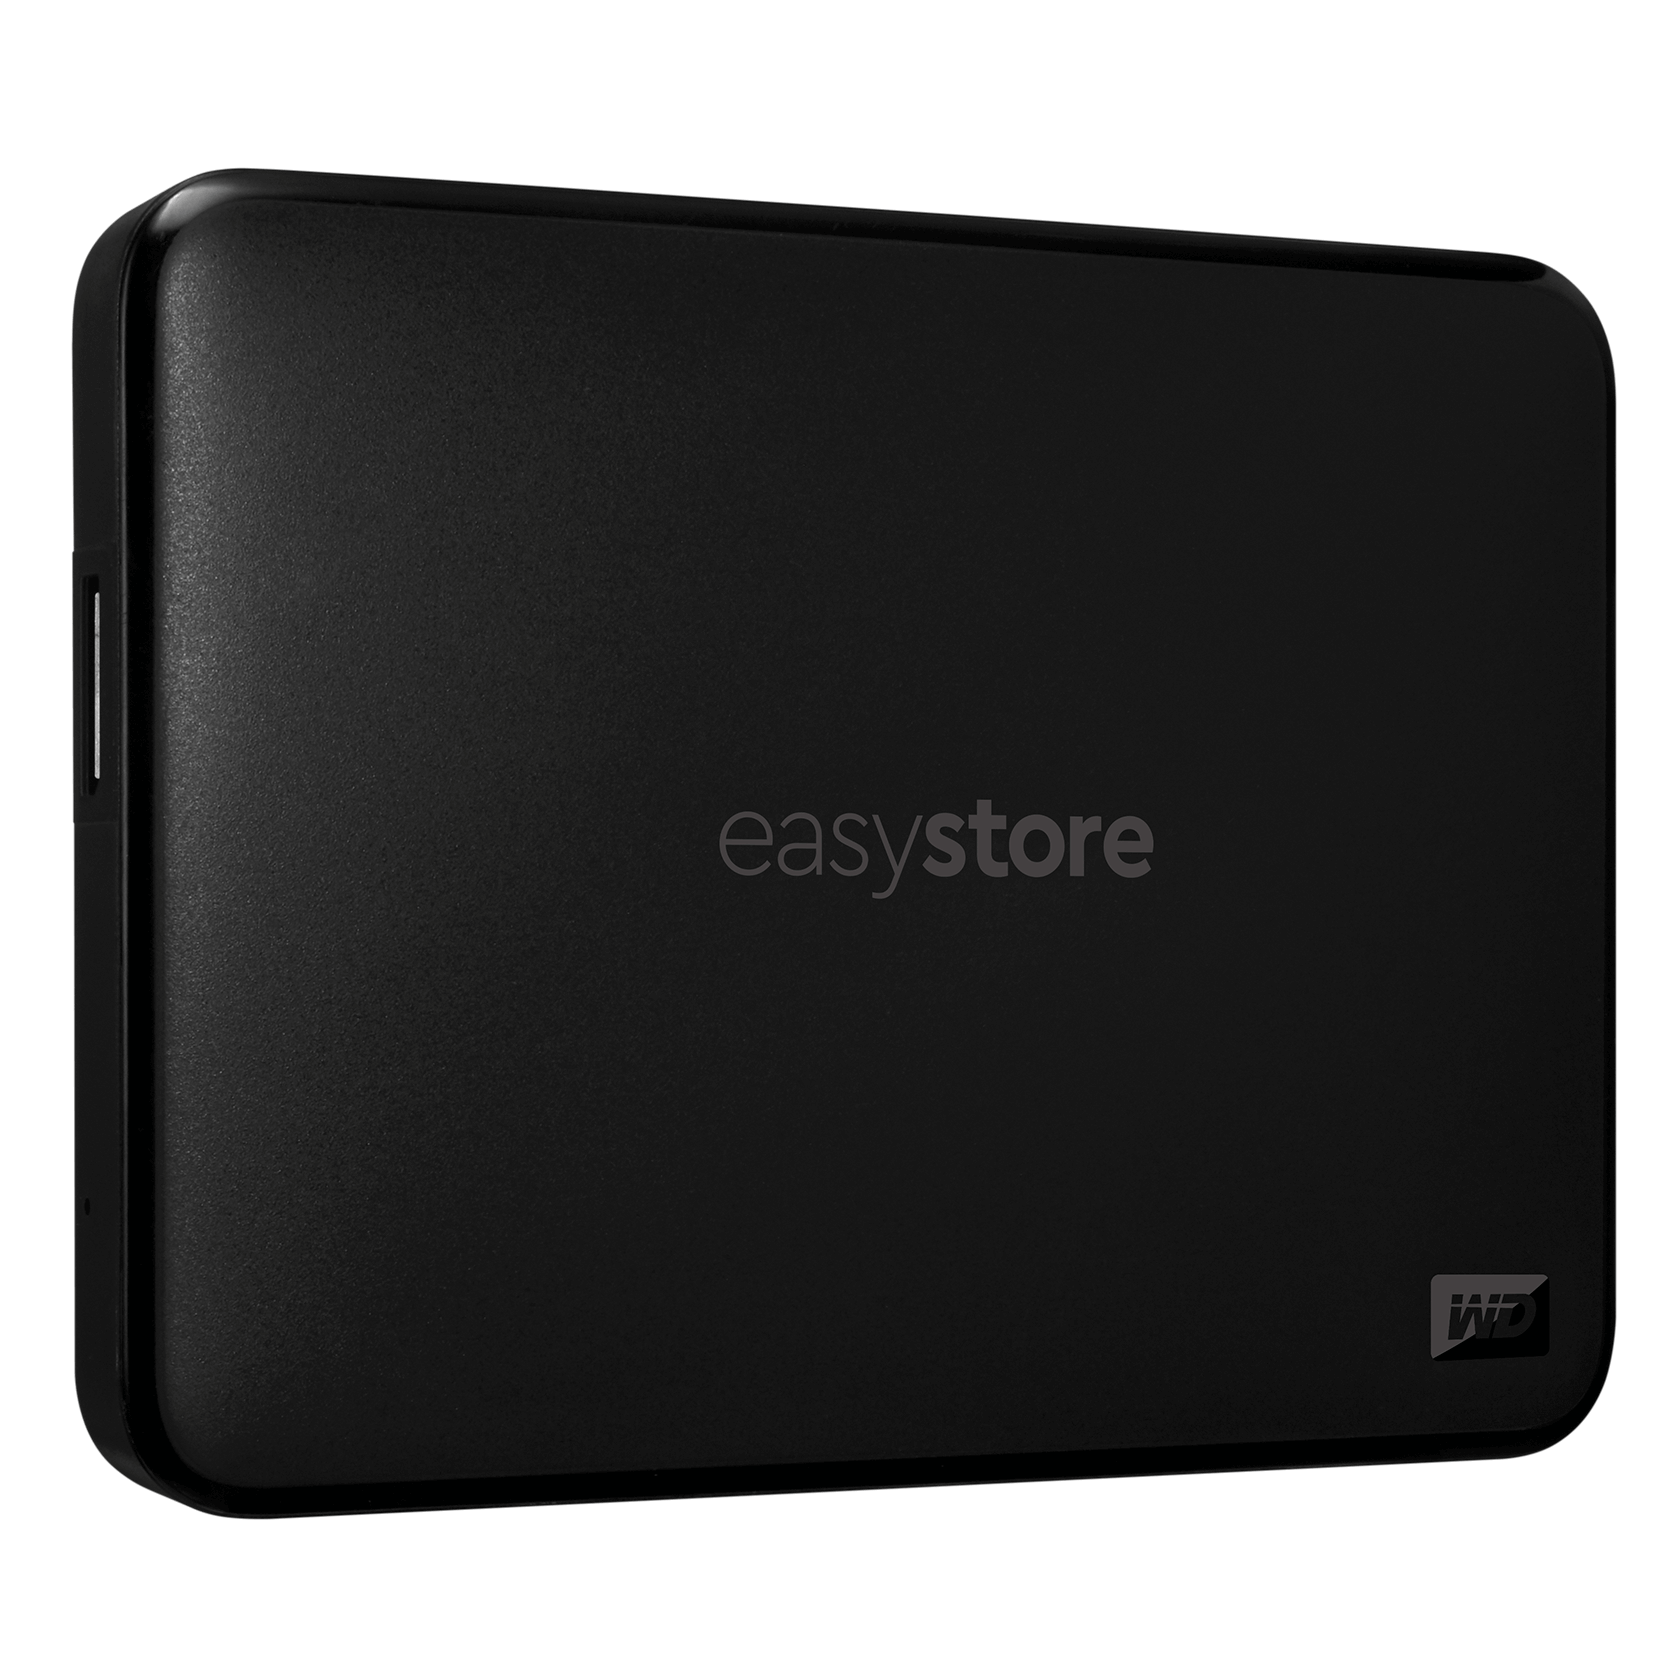 wd easystore quick install guide